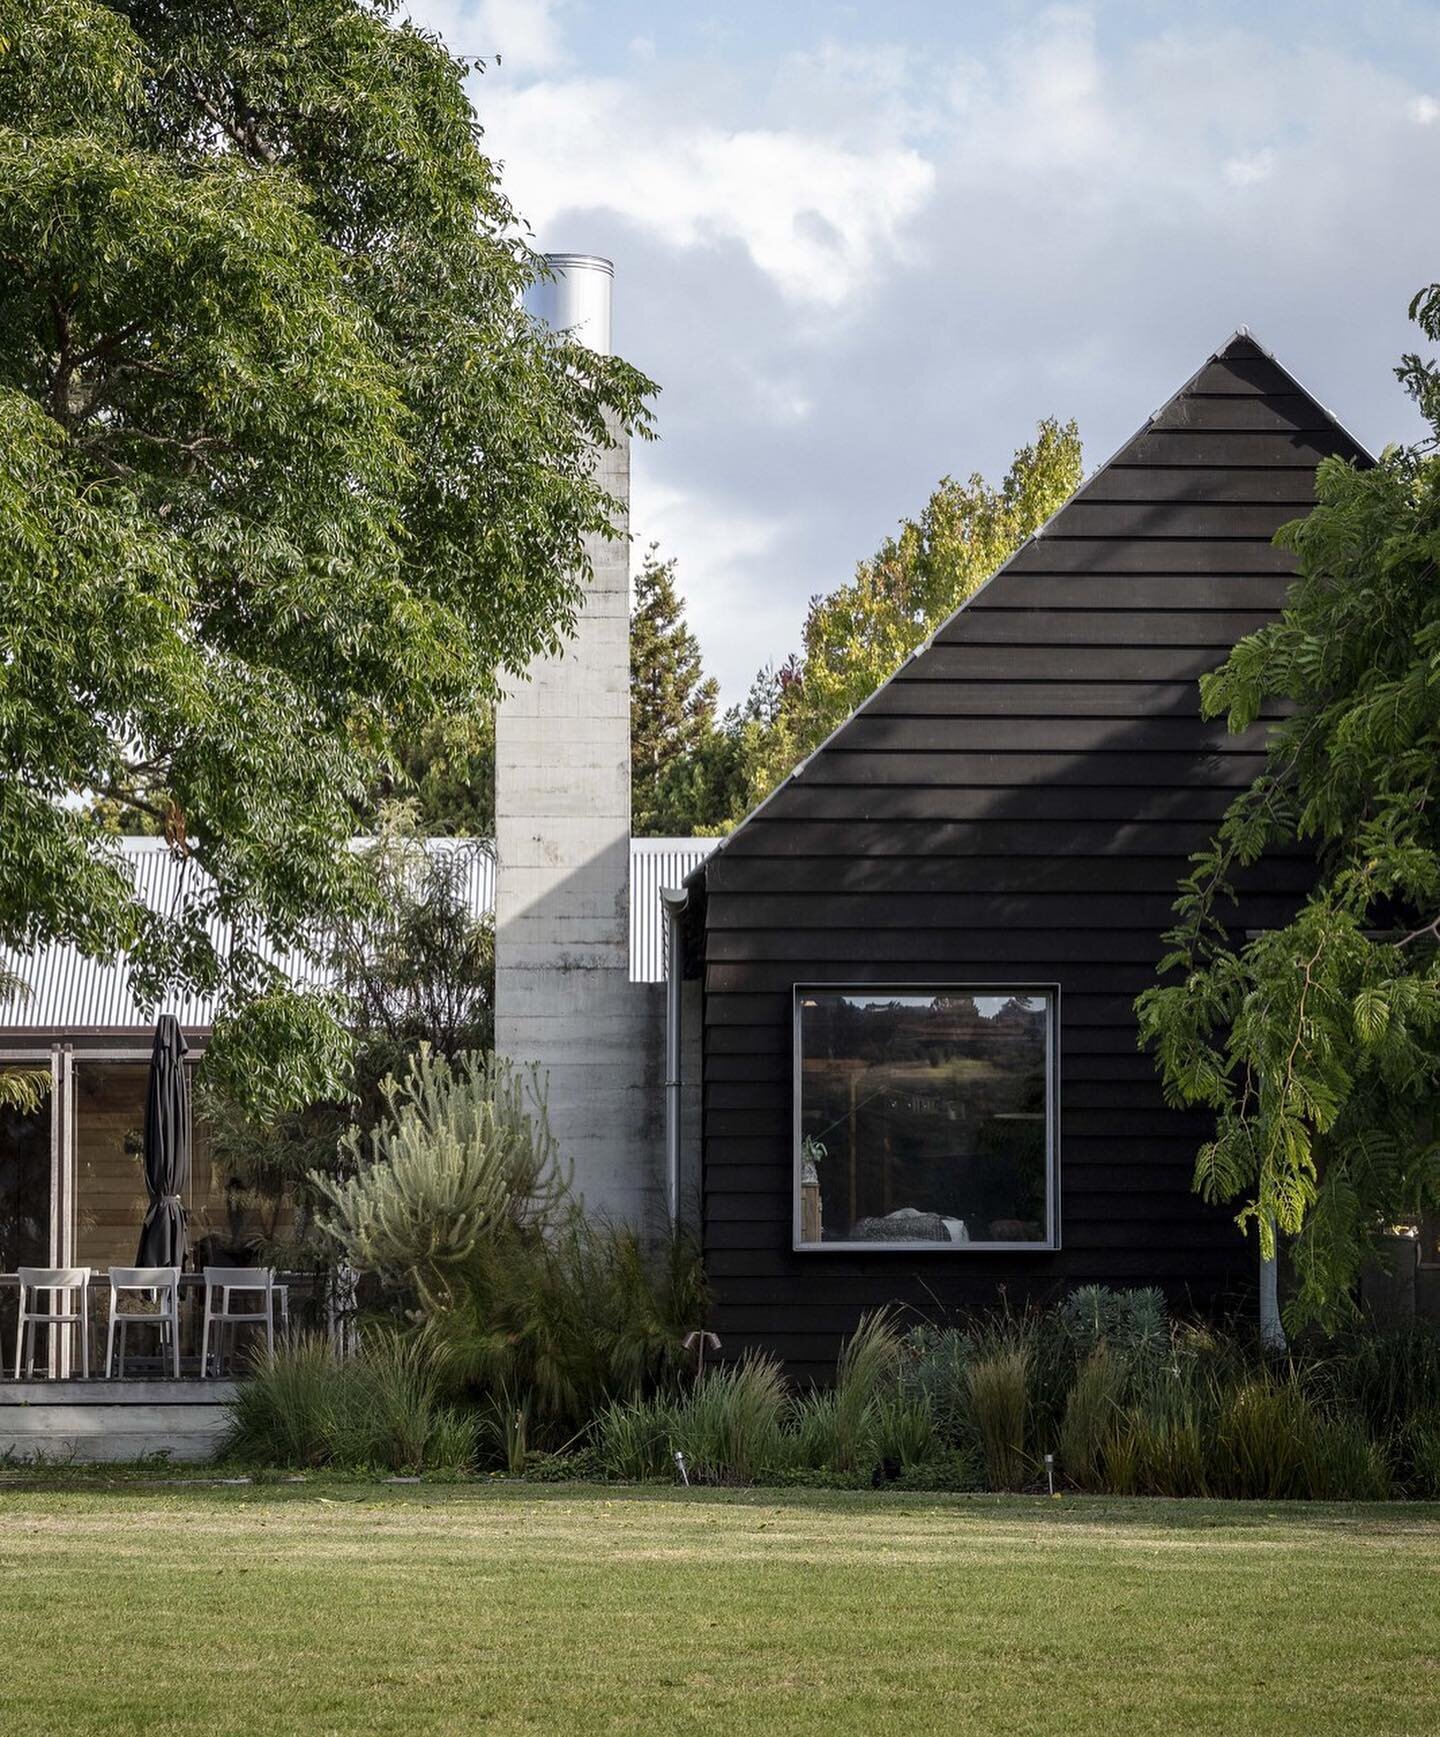 Some more photos of the planting around the house of this property at Point Wells, Omaha. The garden echoes the surrounding estuarine environment, sweeping amoebic shaped plant beds comprising a mix of NZ native and South African plants that share th